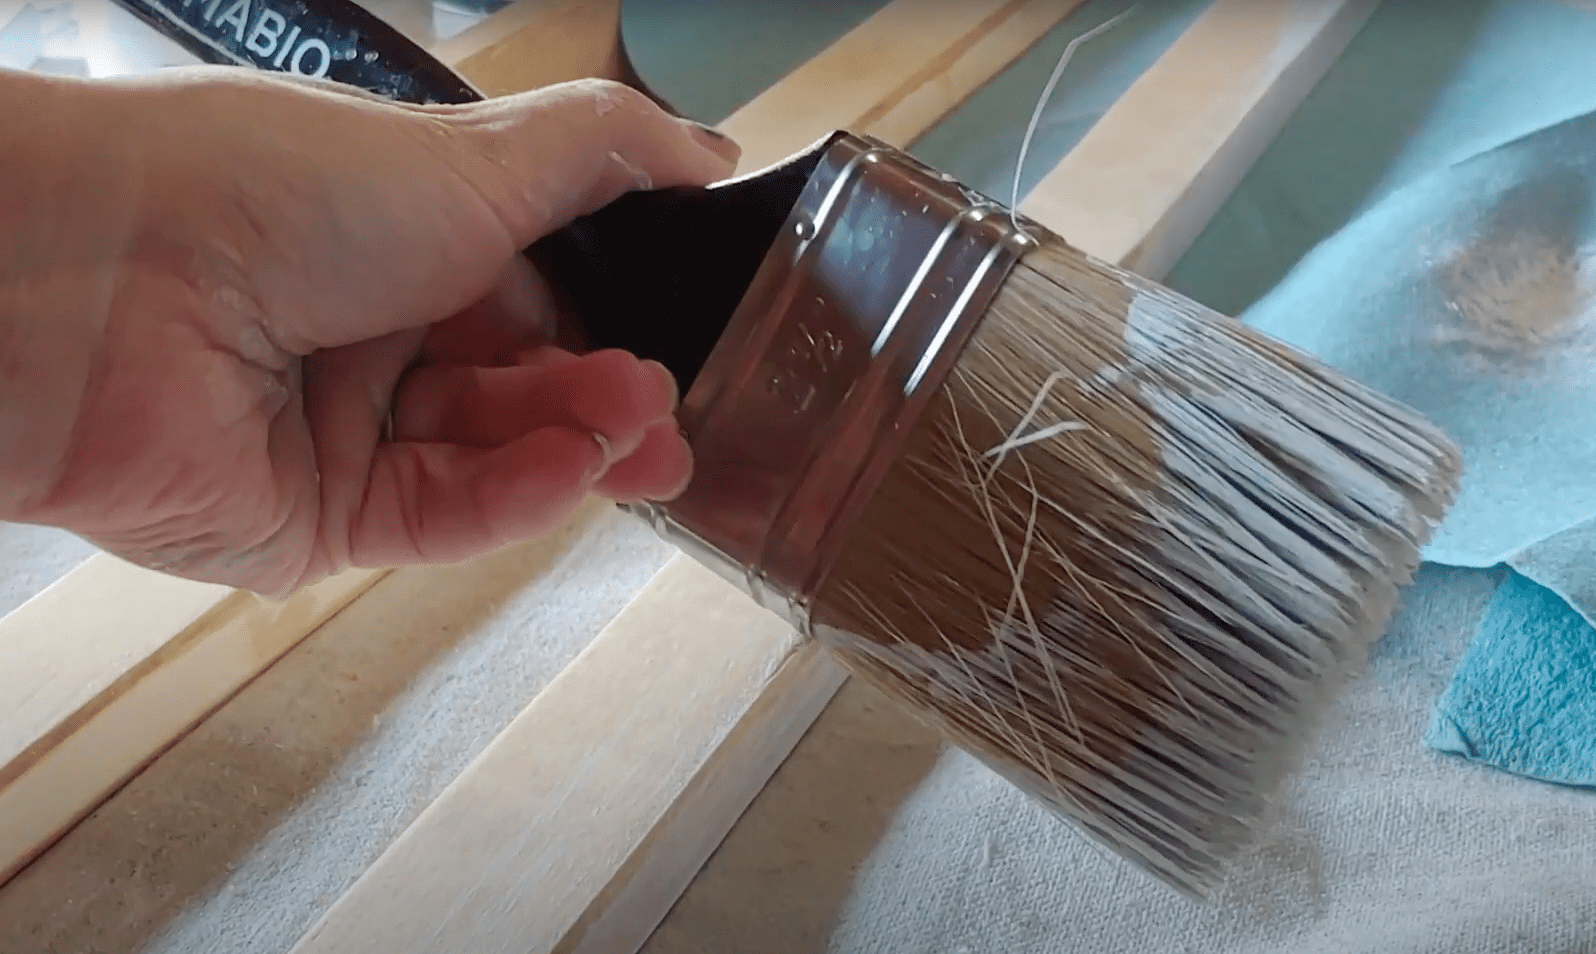 HOW TO BUILD A CRAFT PAINT BRUSH CLEANING STATION / DRYING RACK